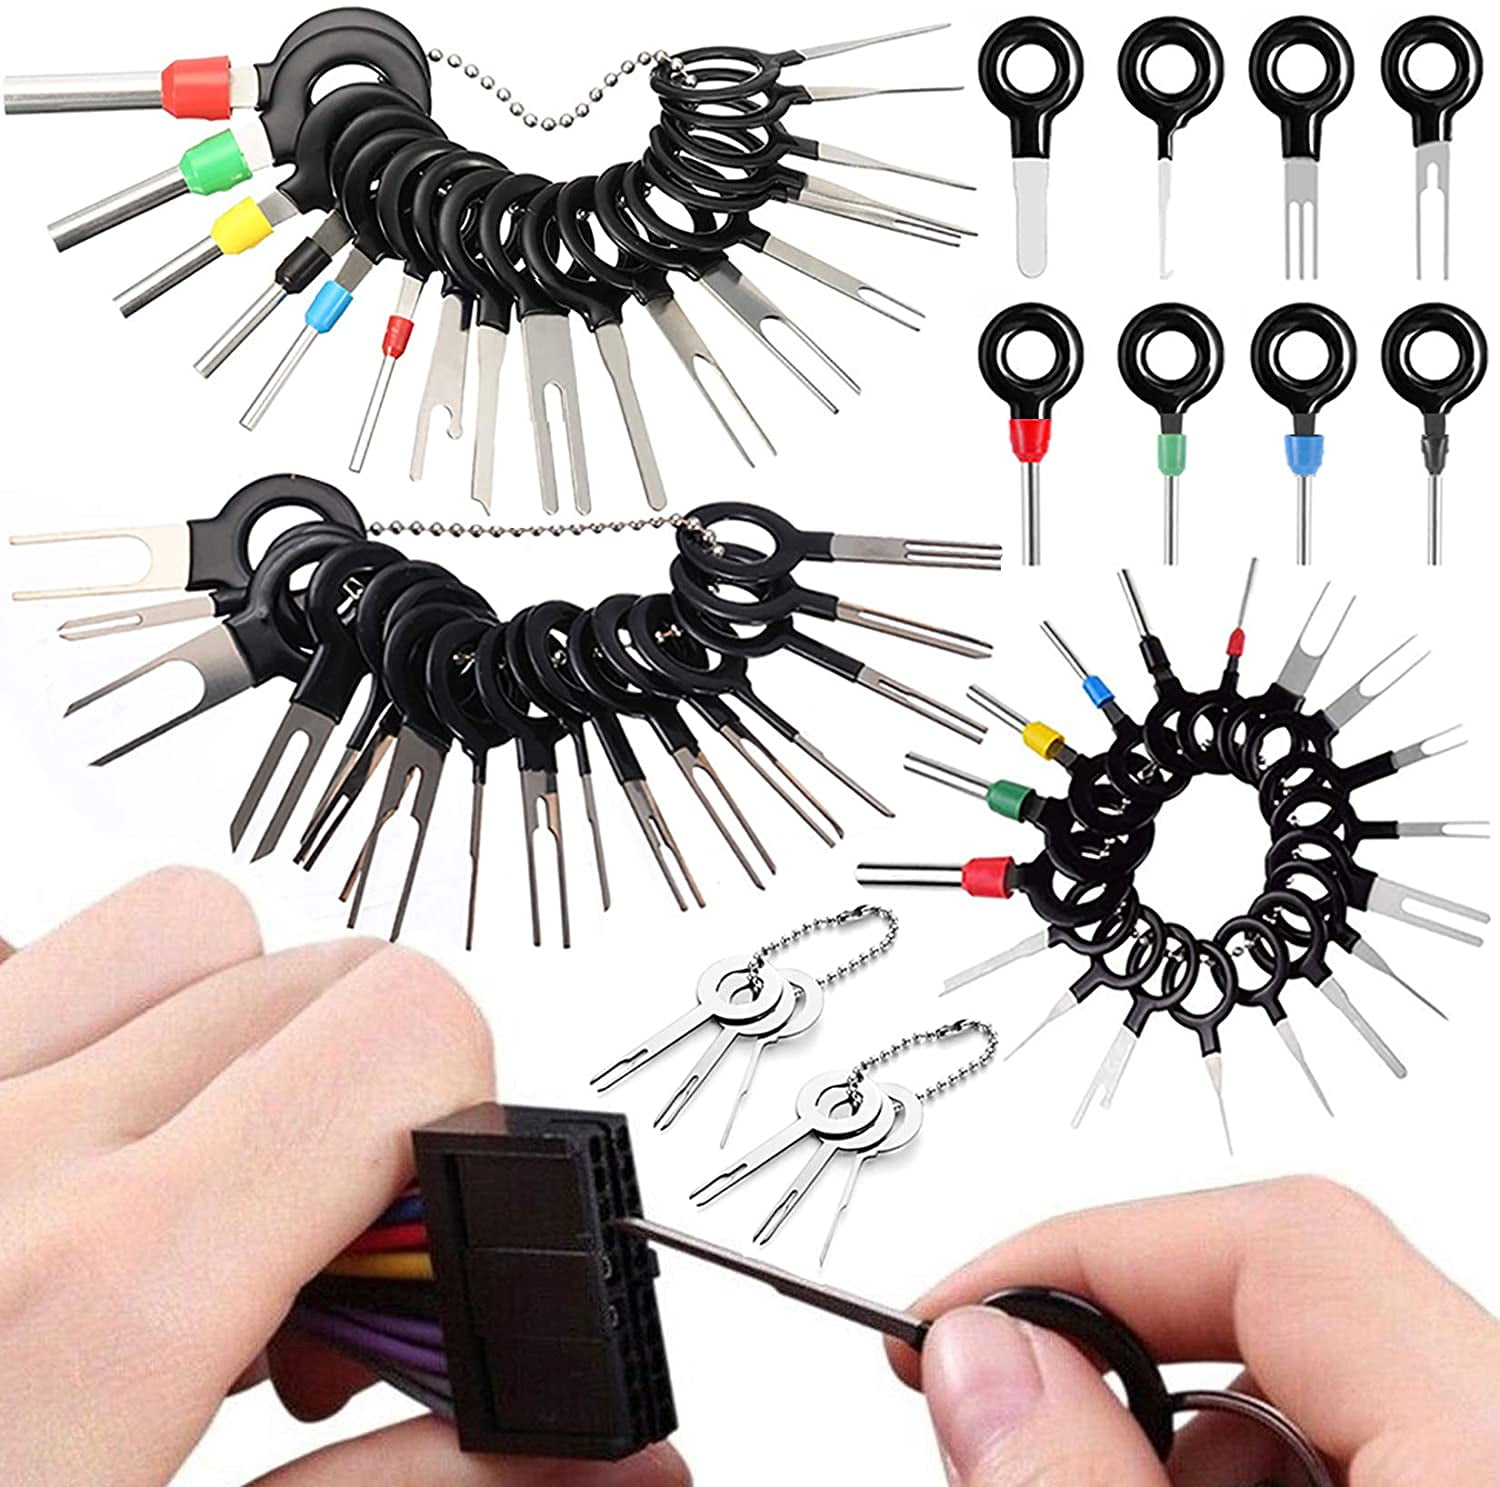 12 Pcs Terminals Removal Tools with Chrome Handle Connector Pin Remover Kit Crimp Wiring Car Electrical Cable with Blue Box 